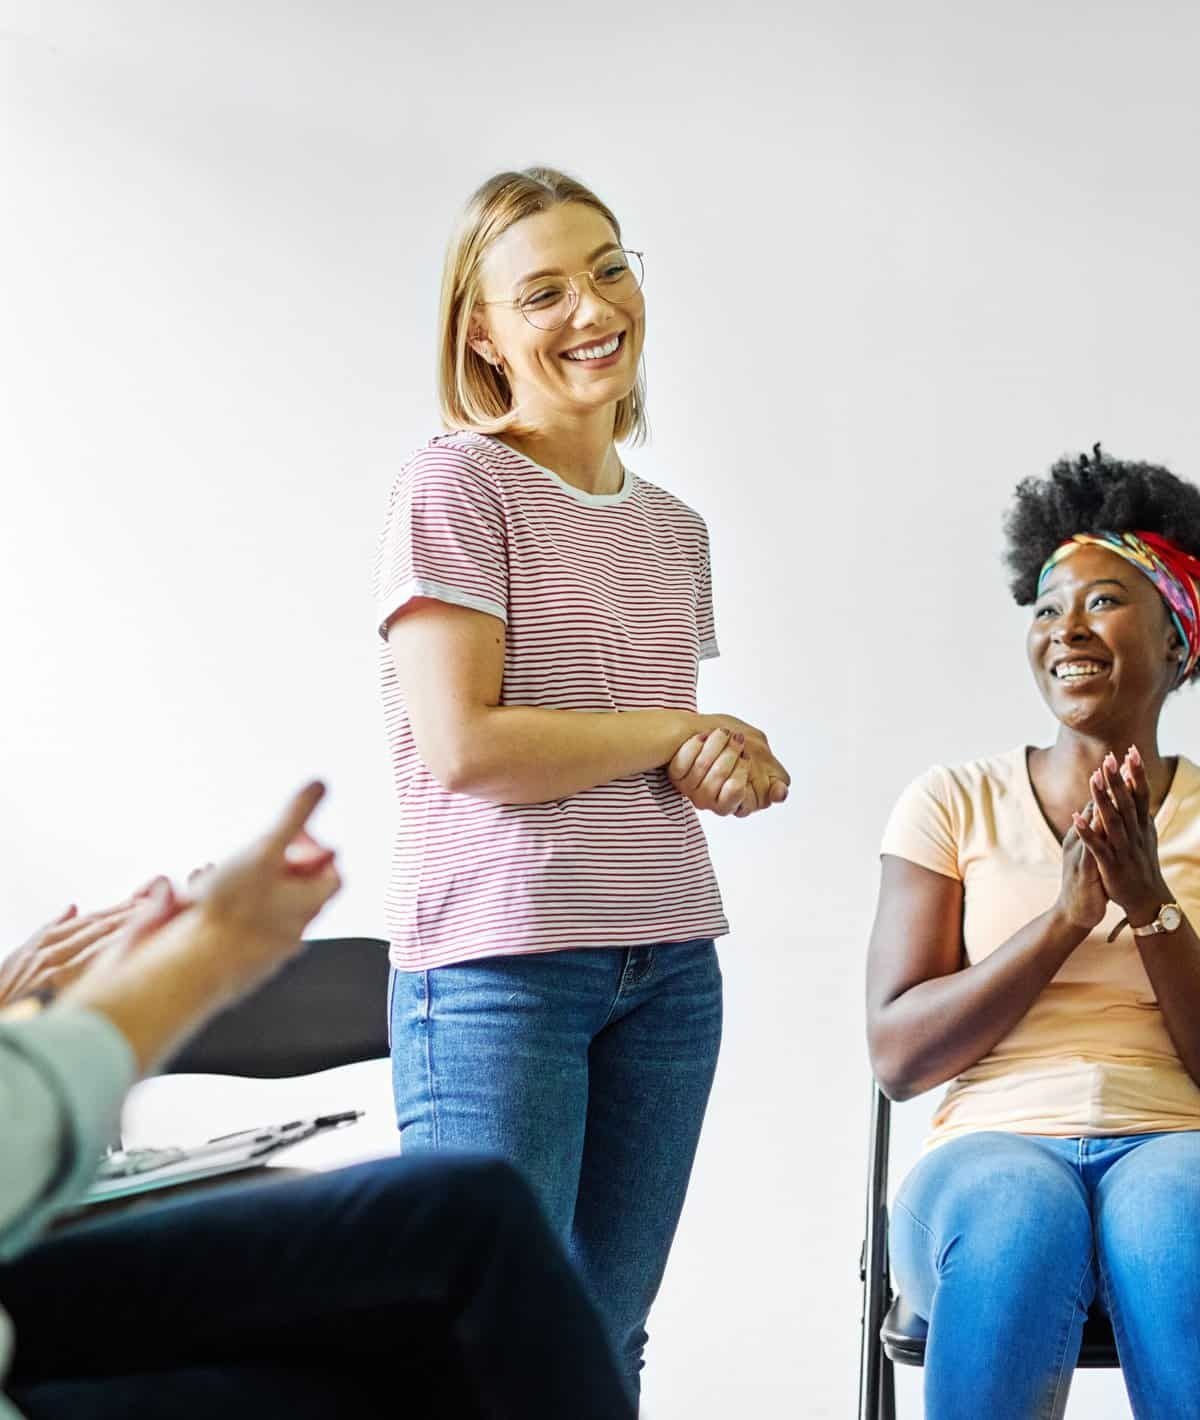 DBT helps a client feel confident during group therapy